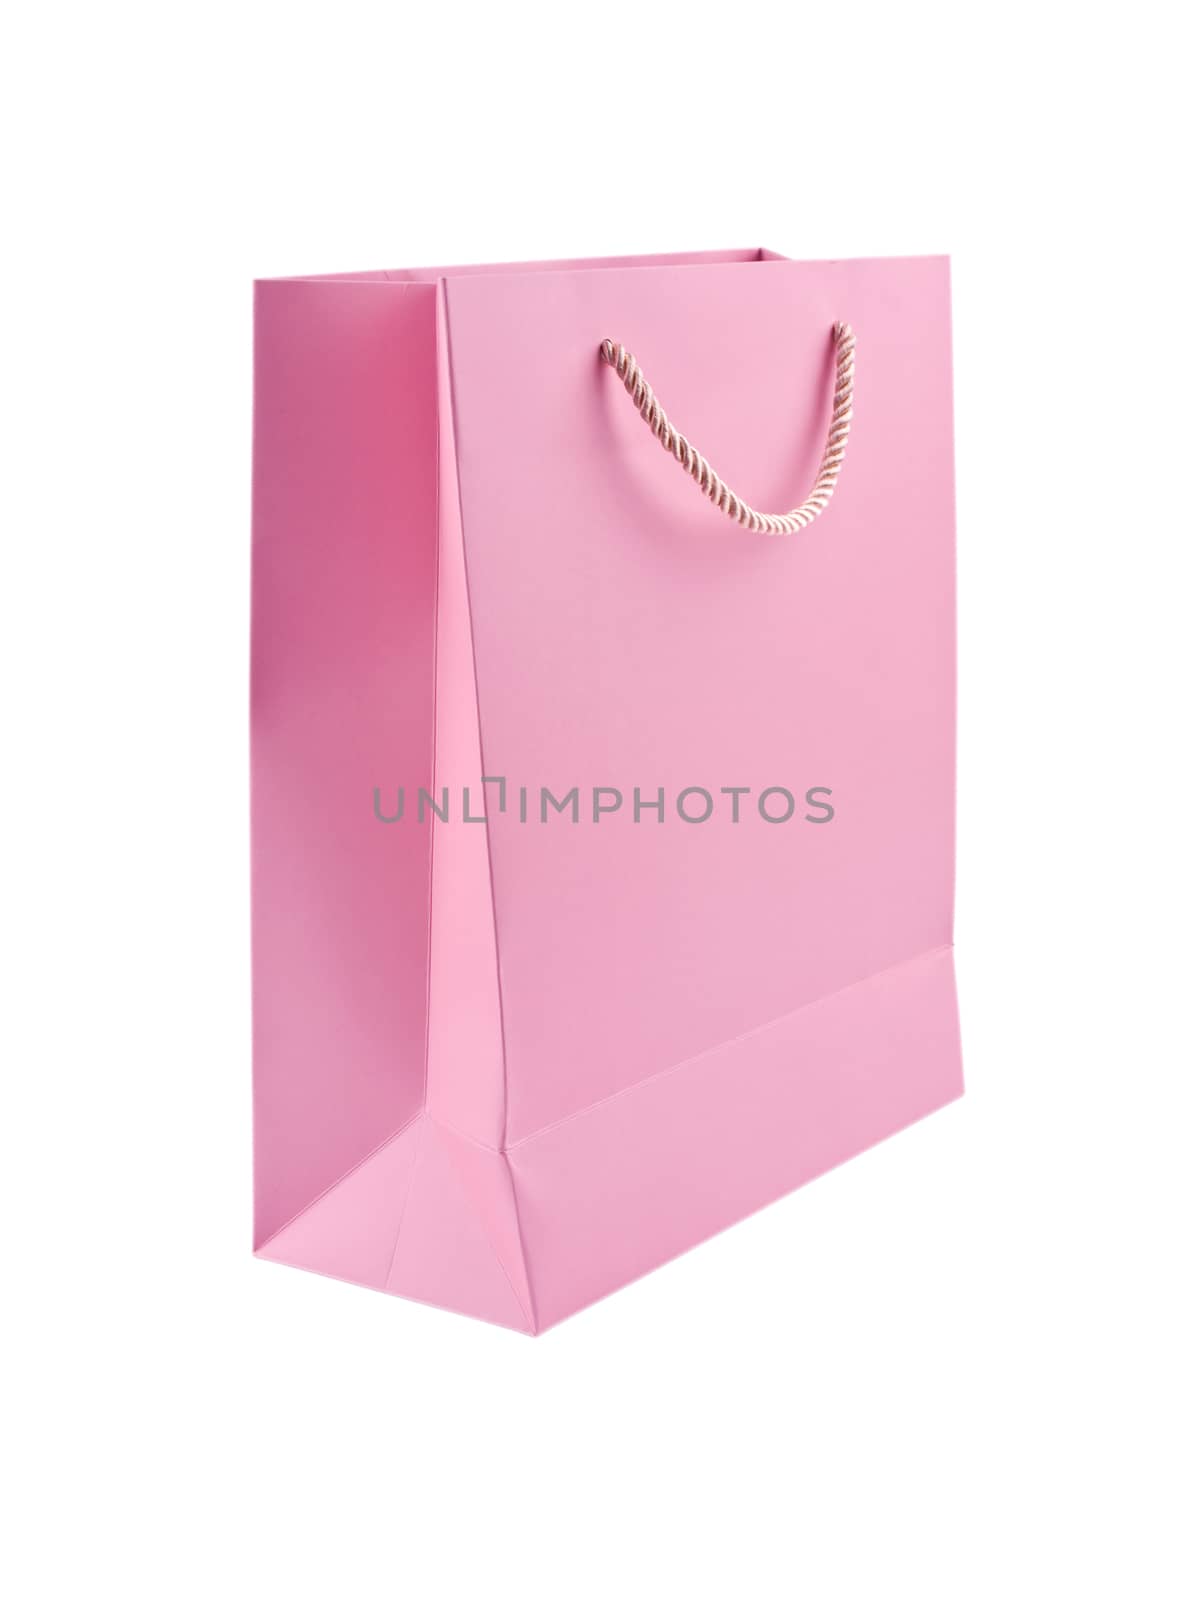 Pink gift bag iolated on white by mrsNstudio